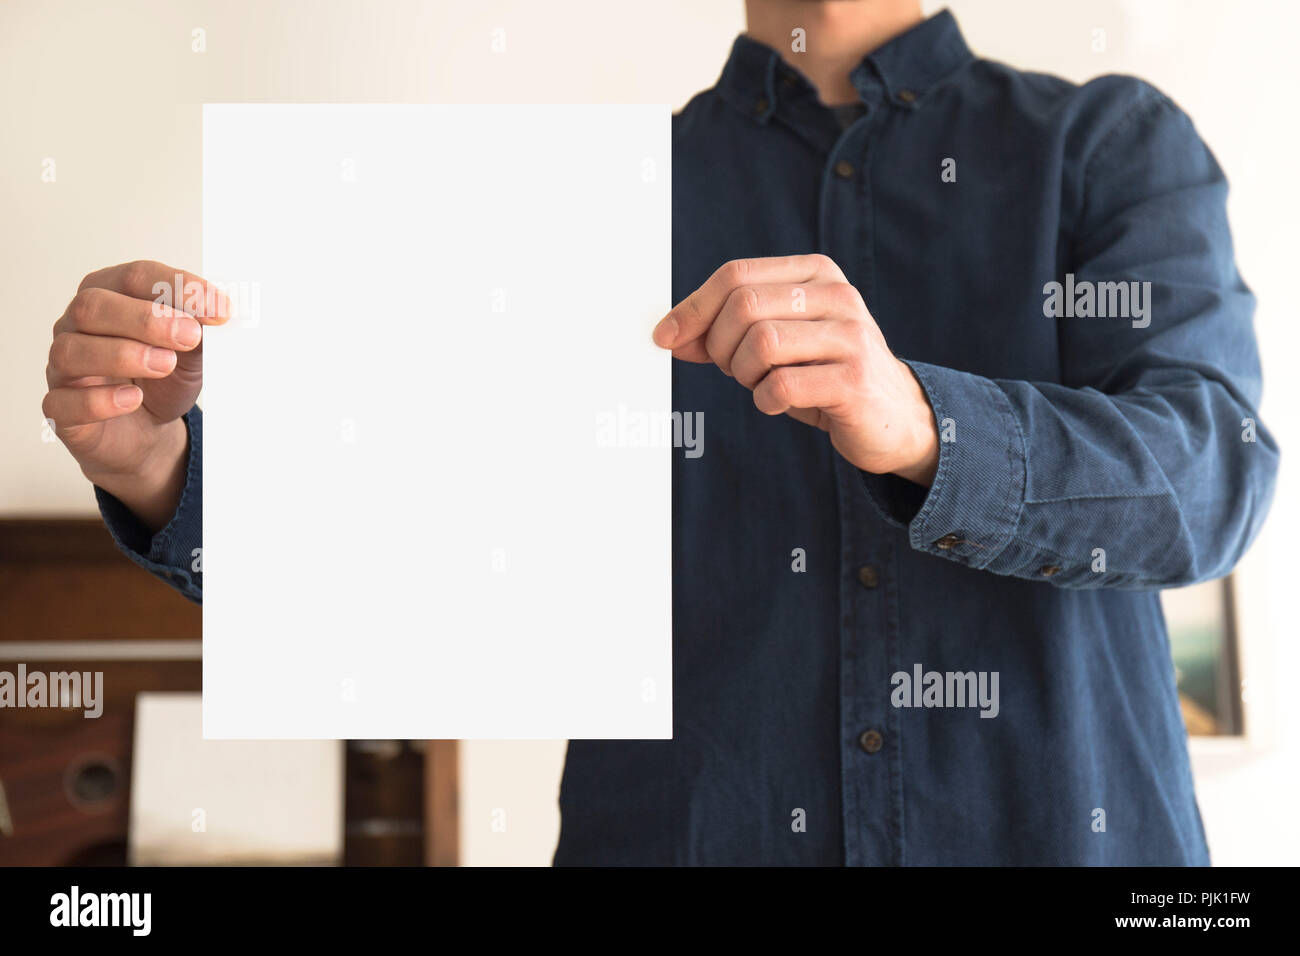 A blank sheet of paper with free space held by one person Stock Photo